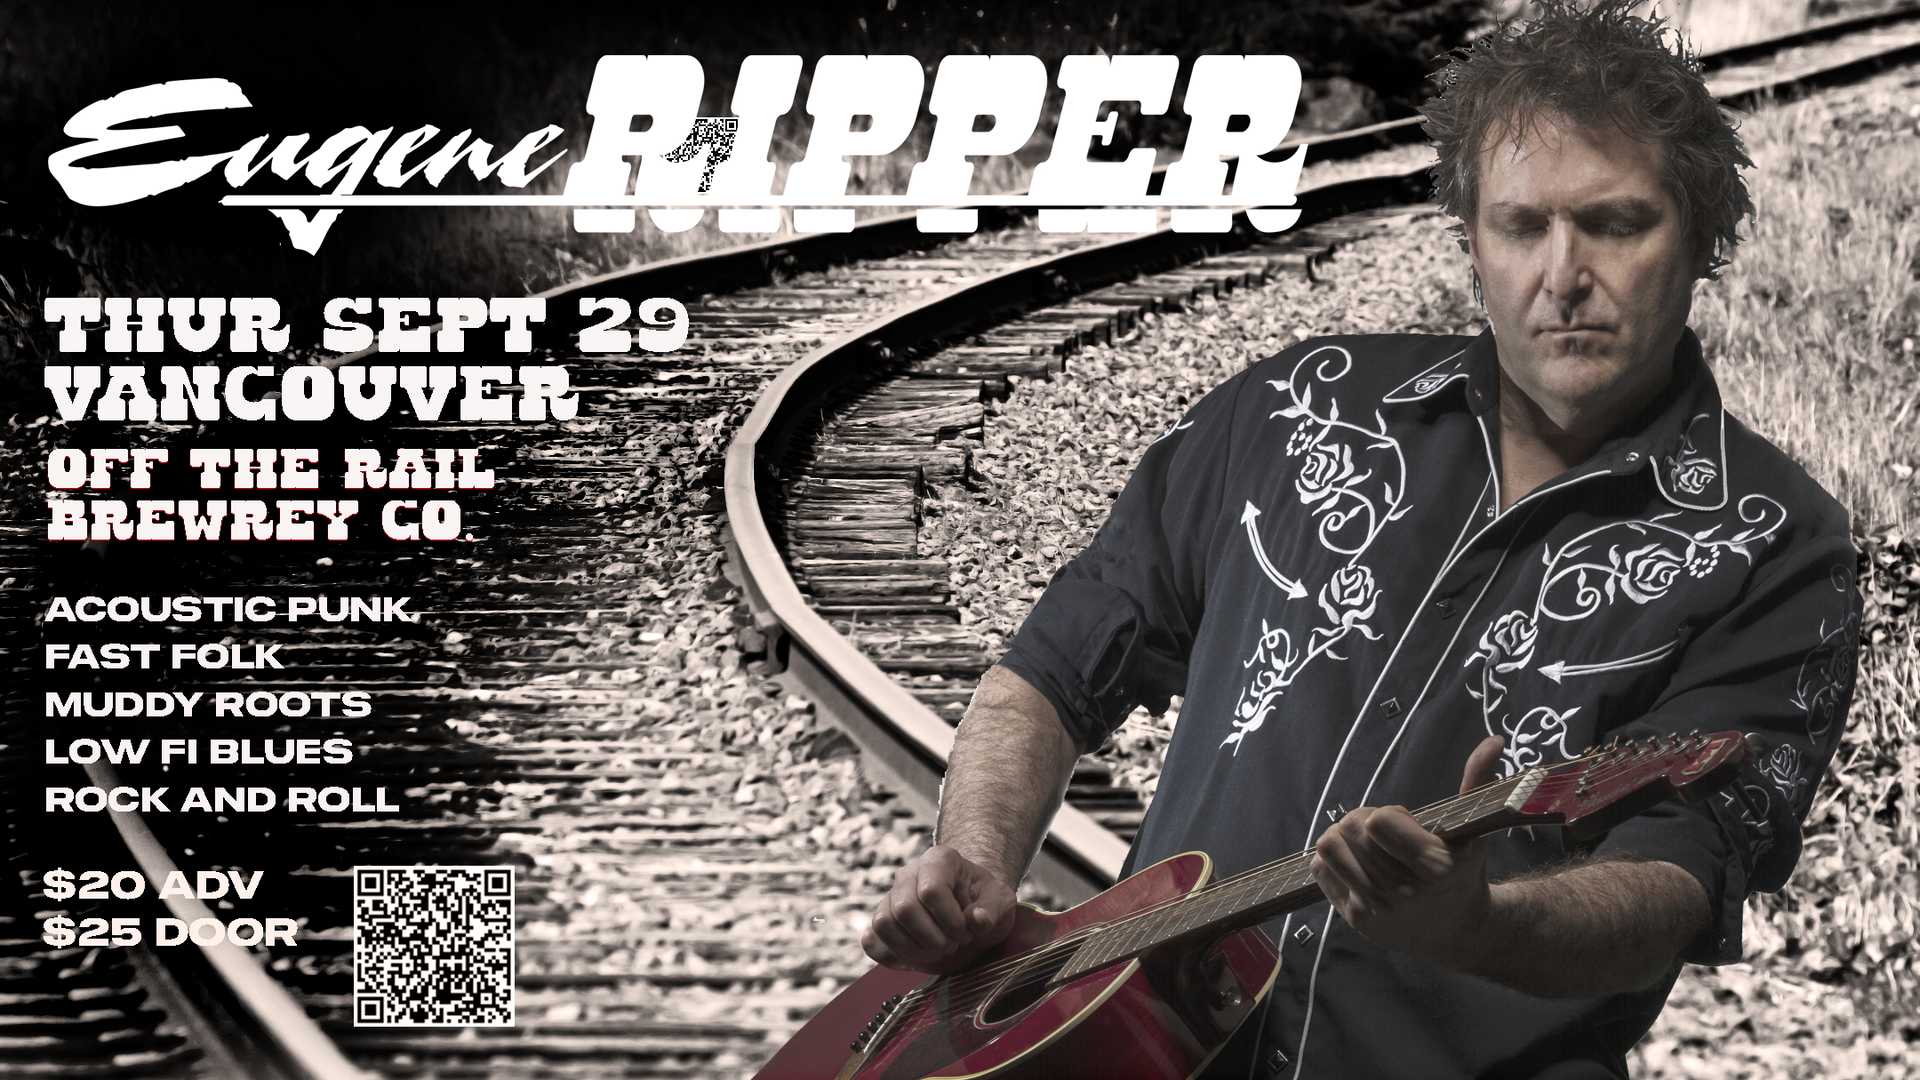 EUGENE RIPPER, "Go Van Gogh Tour" Don't miss Canada's #1 punk folk rocker - one night only !, Vancouver, British Columbia, Canada